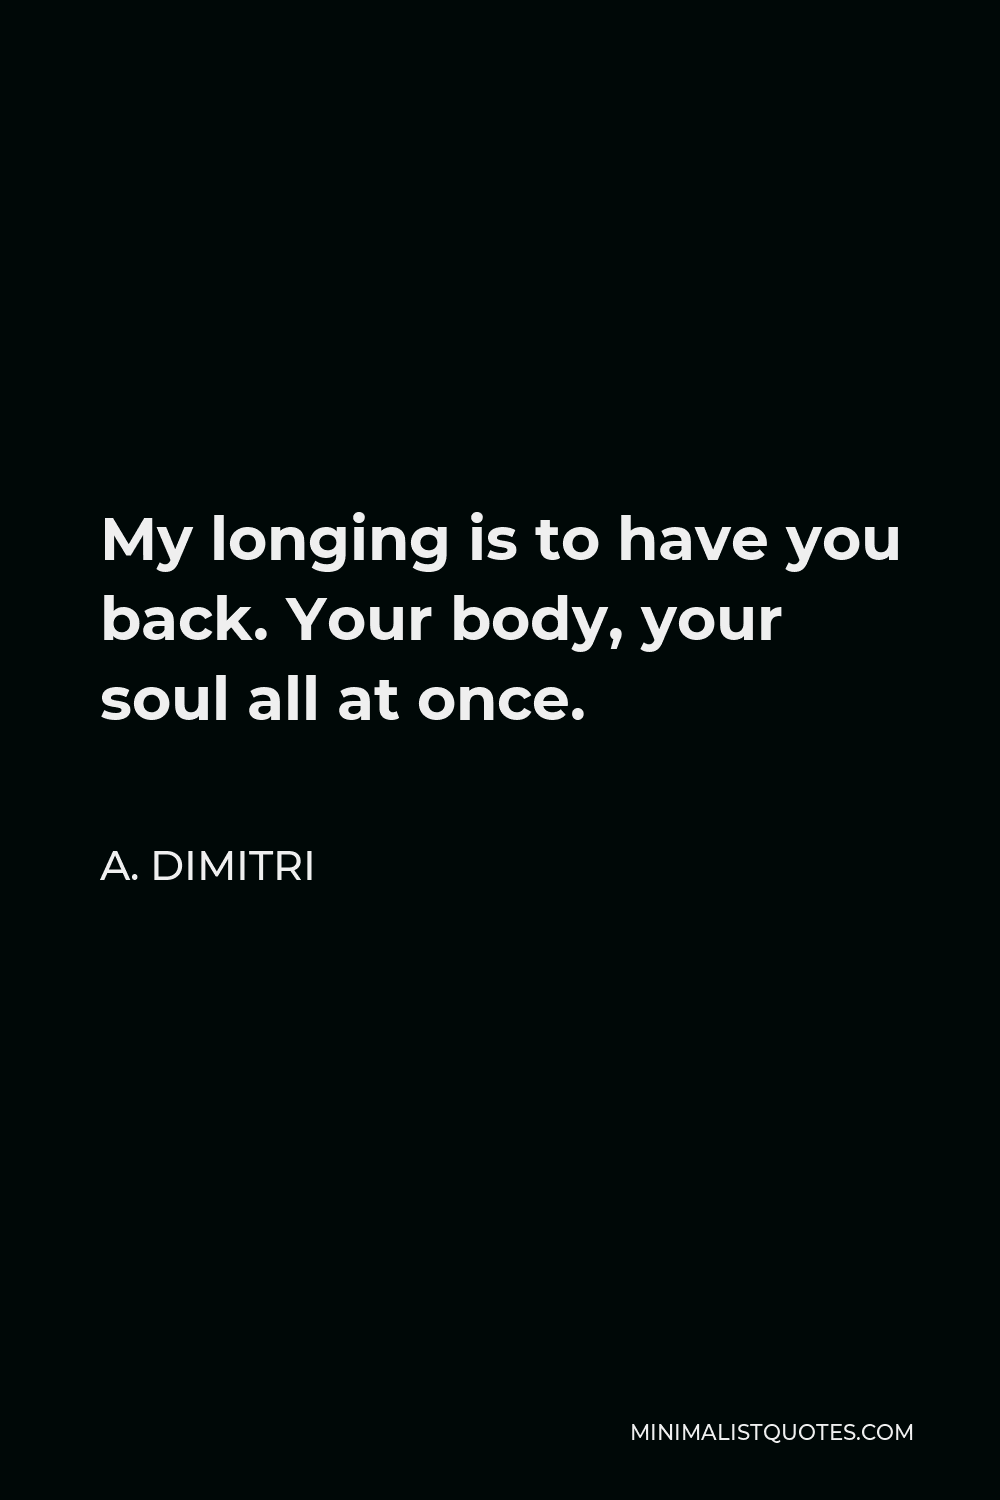 A. Dimitri Quote - My longing is to have you back. Your body, your soul all at once.